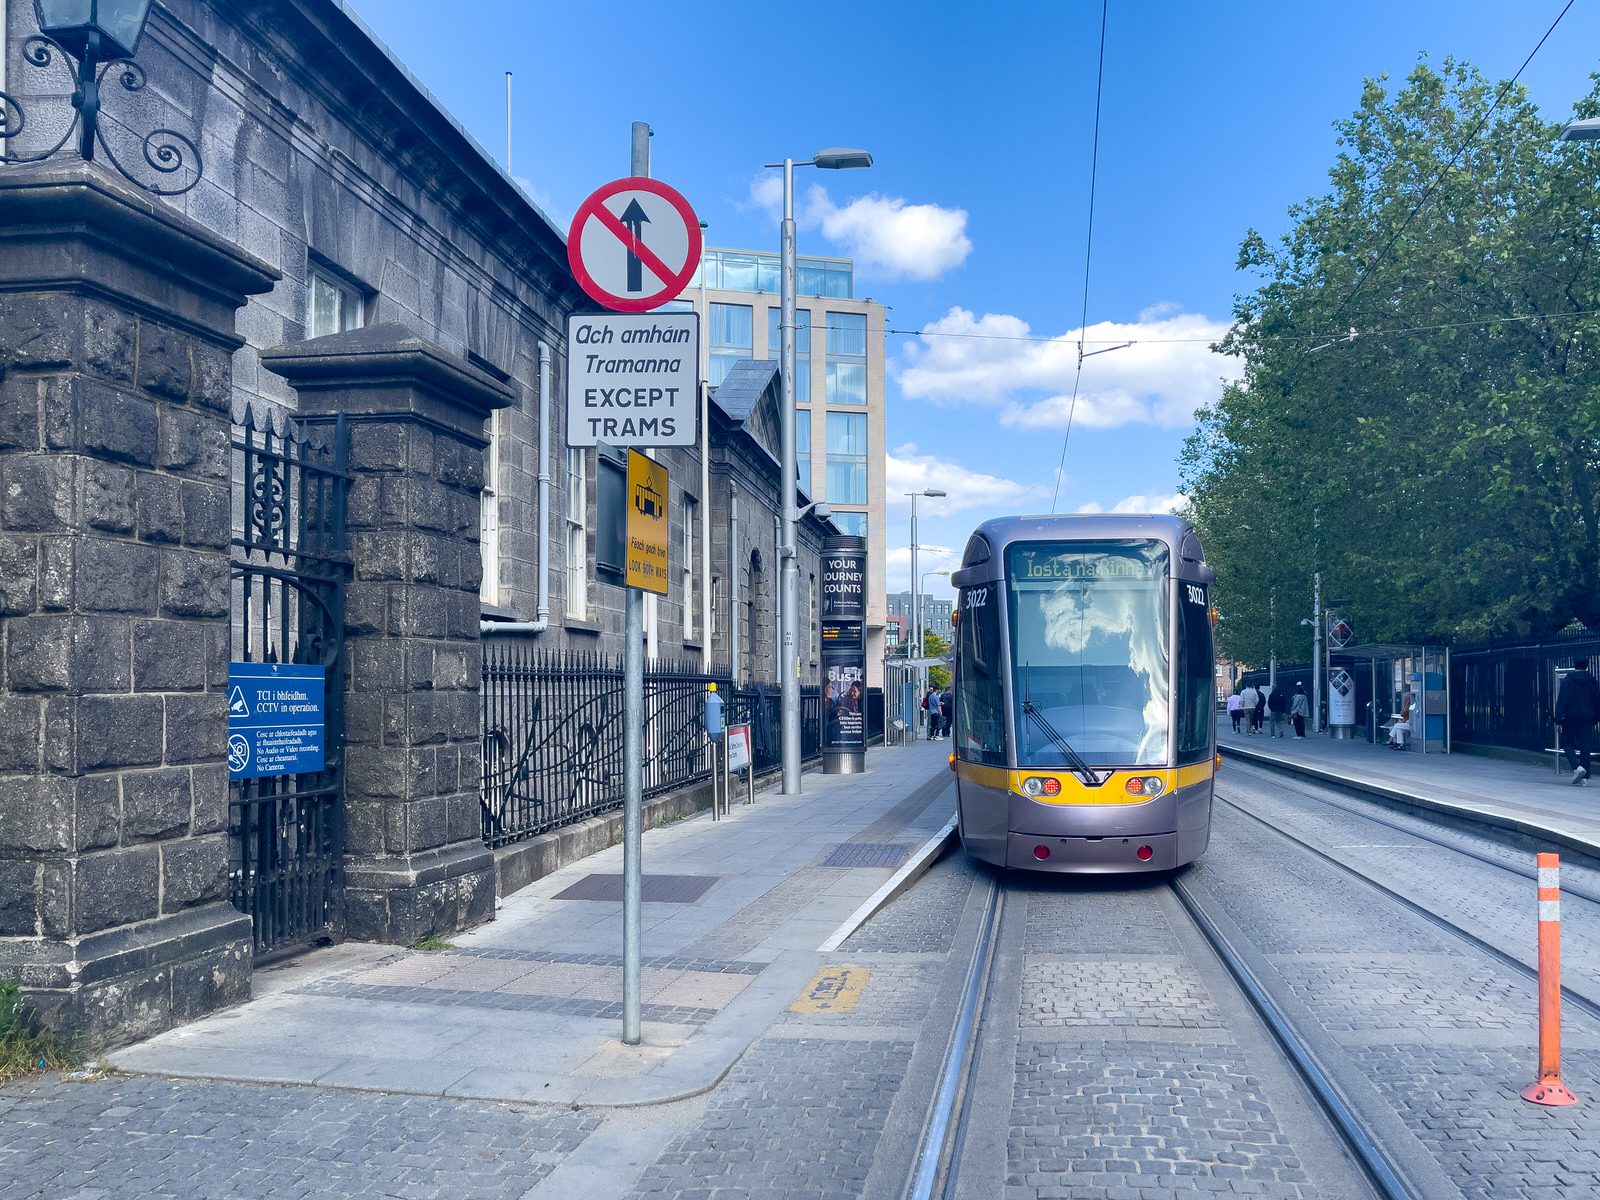 THE LUAS FOUR COURTS TRAM STOP [THERE IS MUCH TO BE SEEN HERE]-234120-1